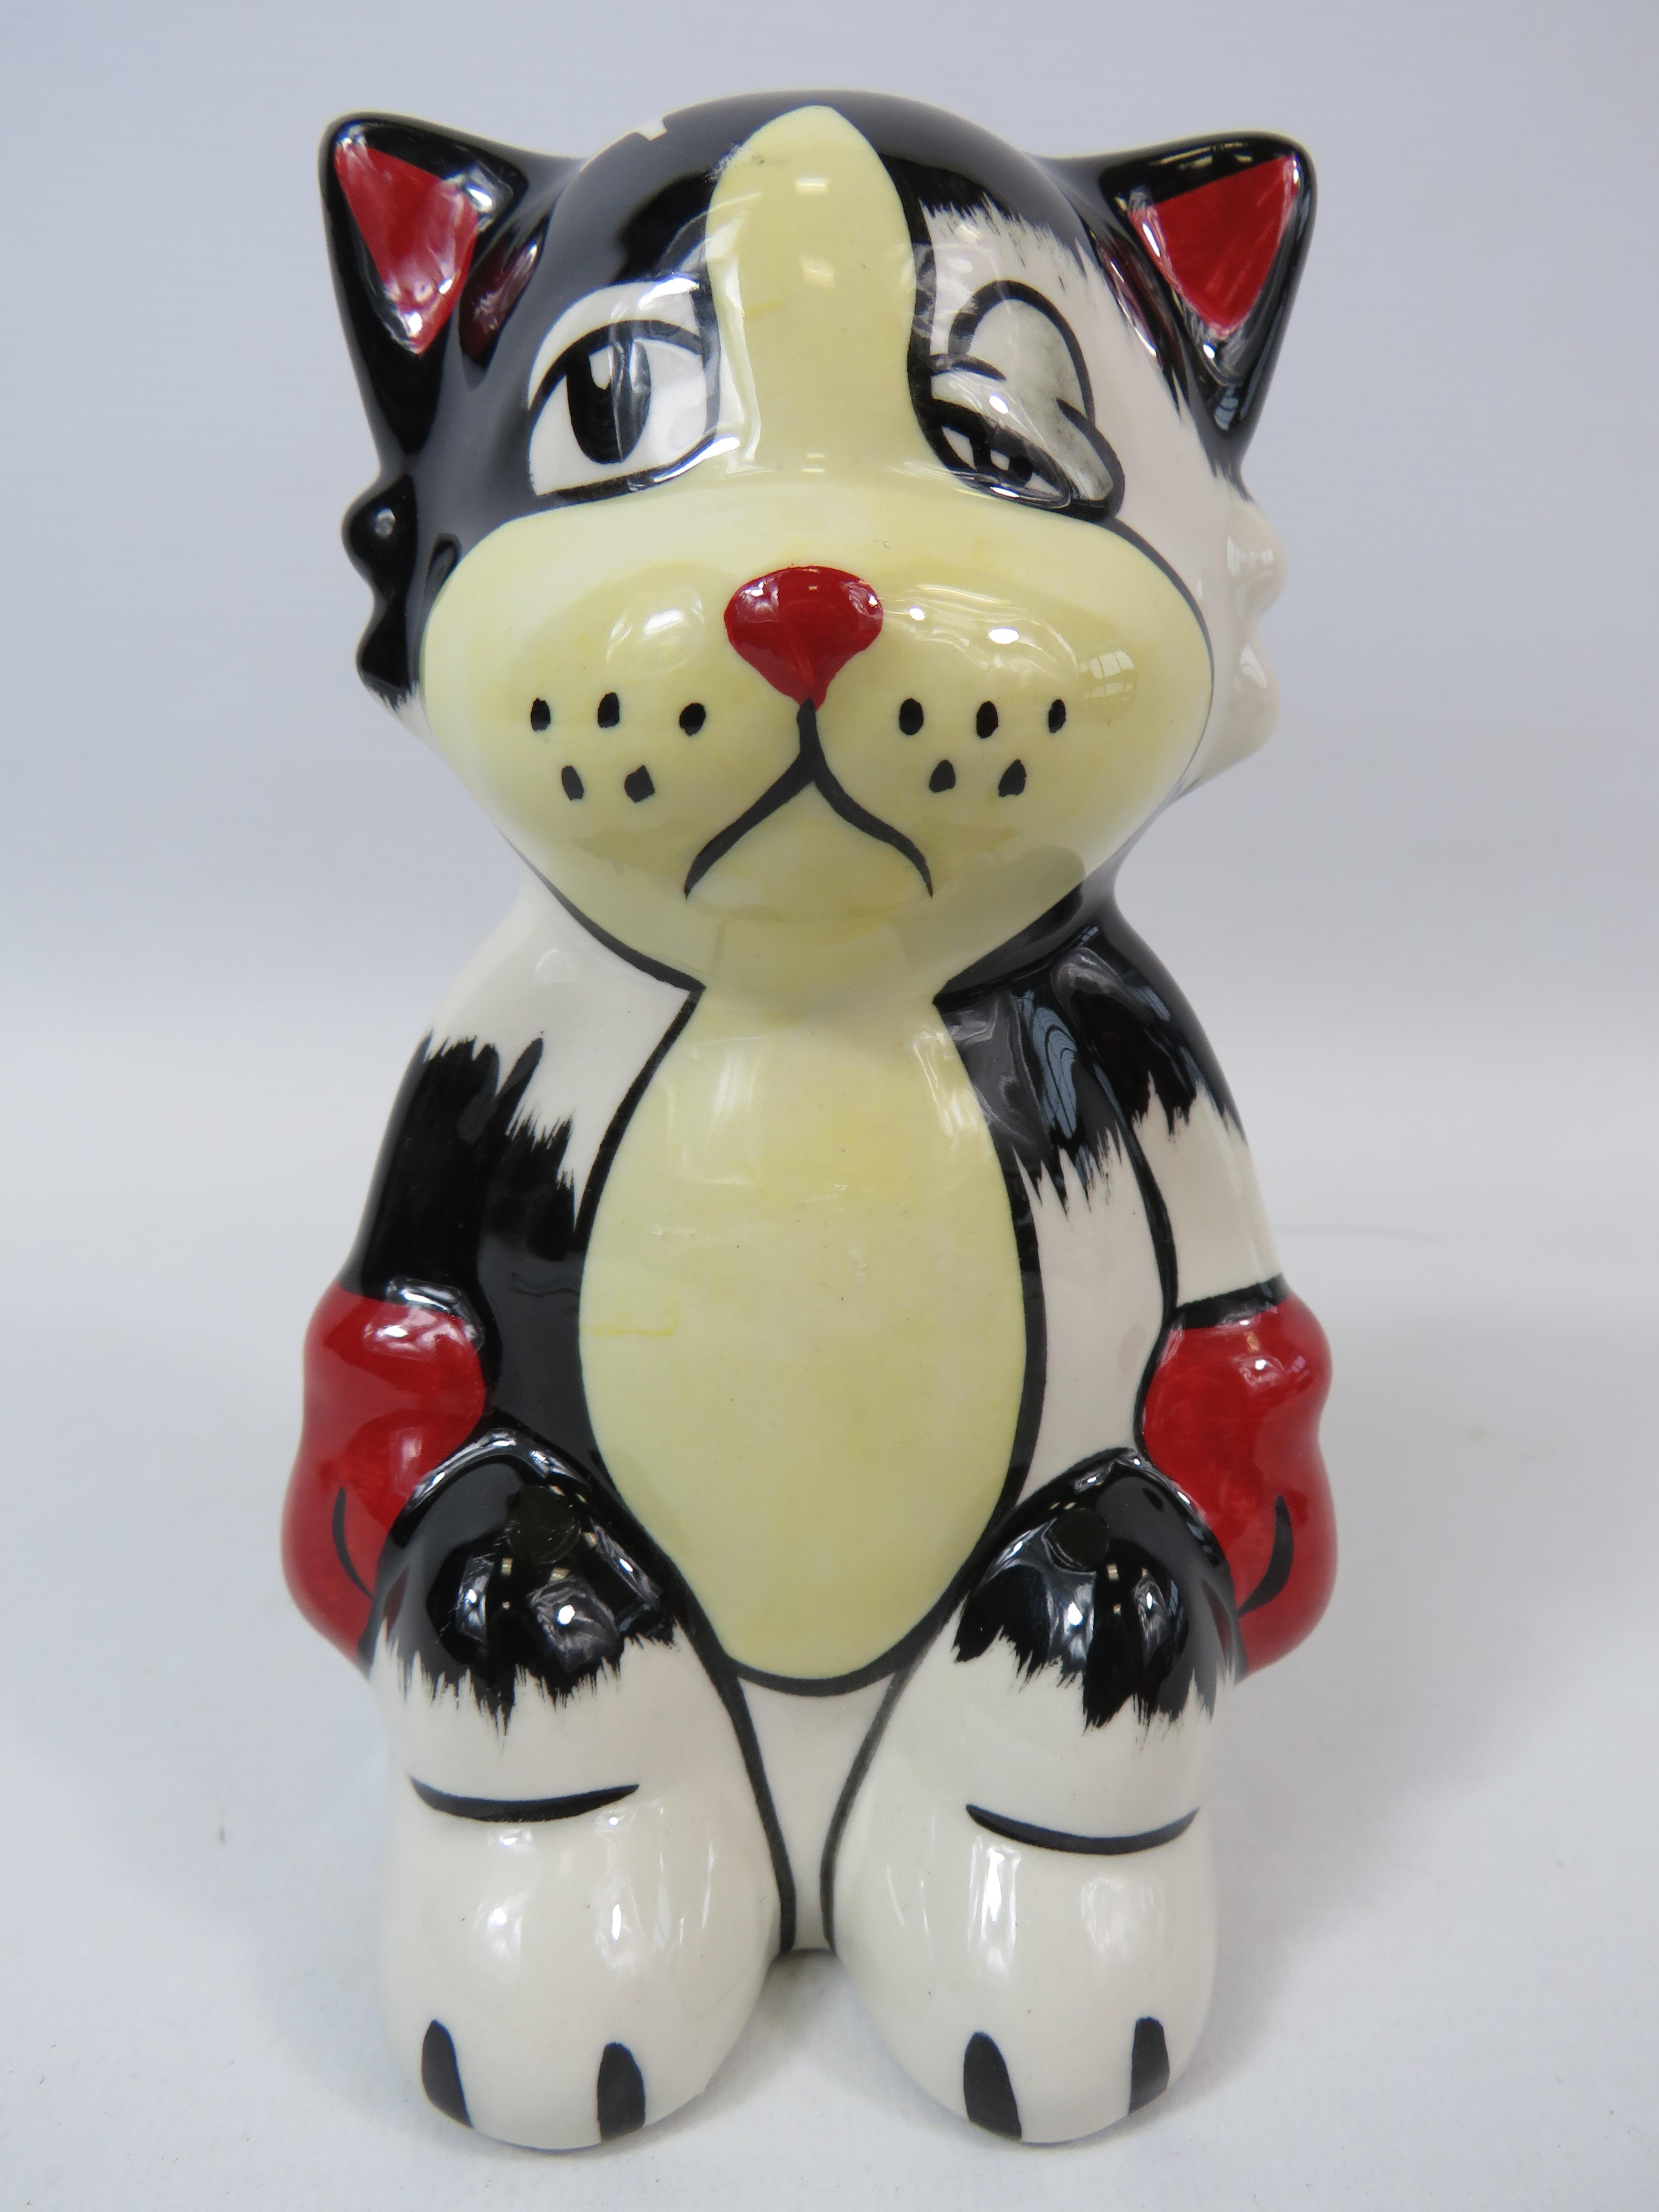 Lorna Bailey Bruiser the cat, approx 6" tall.